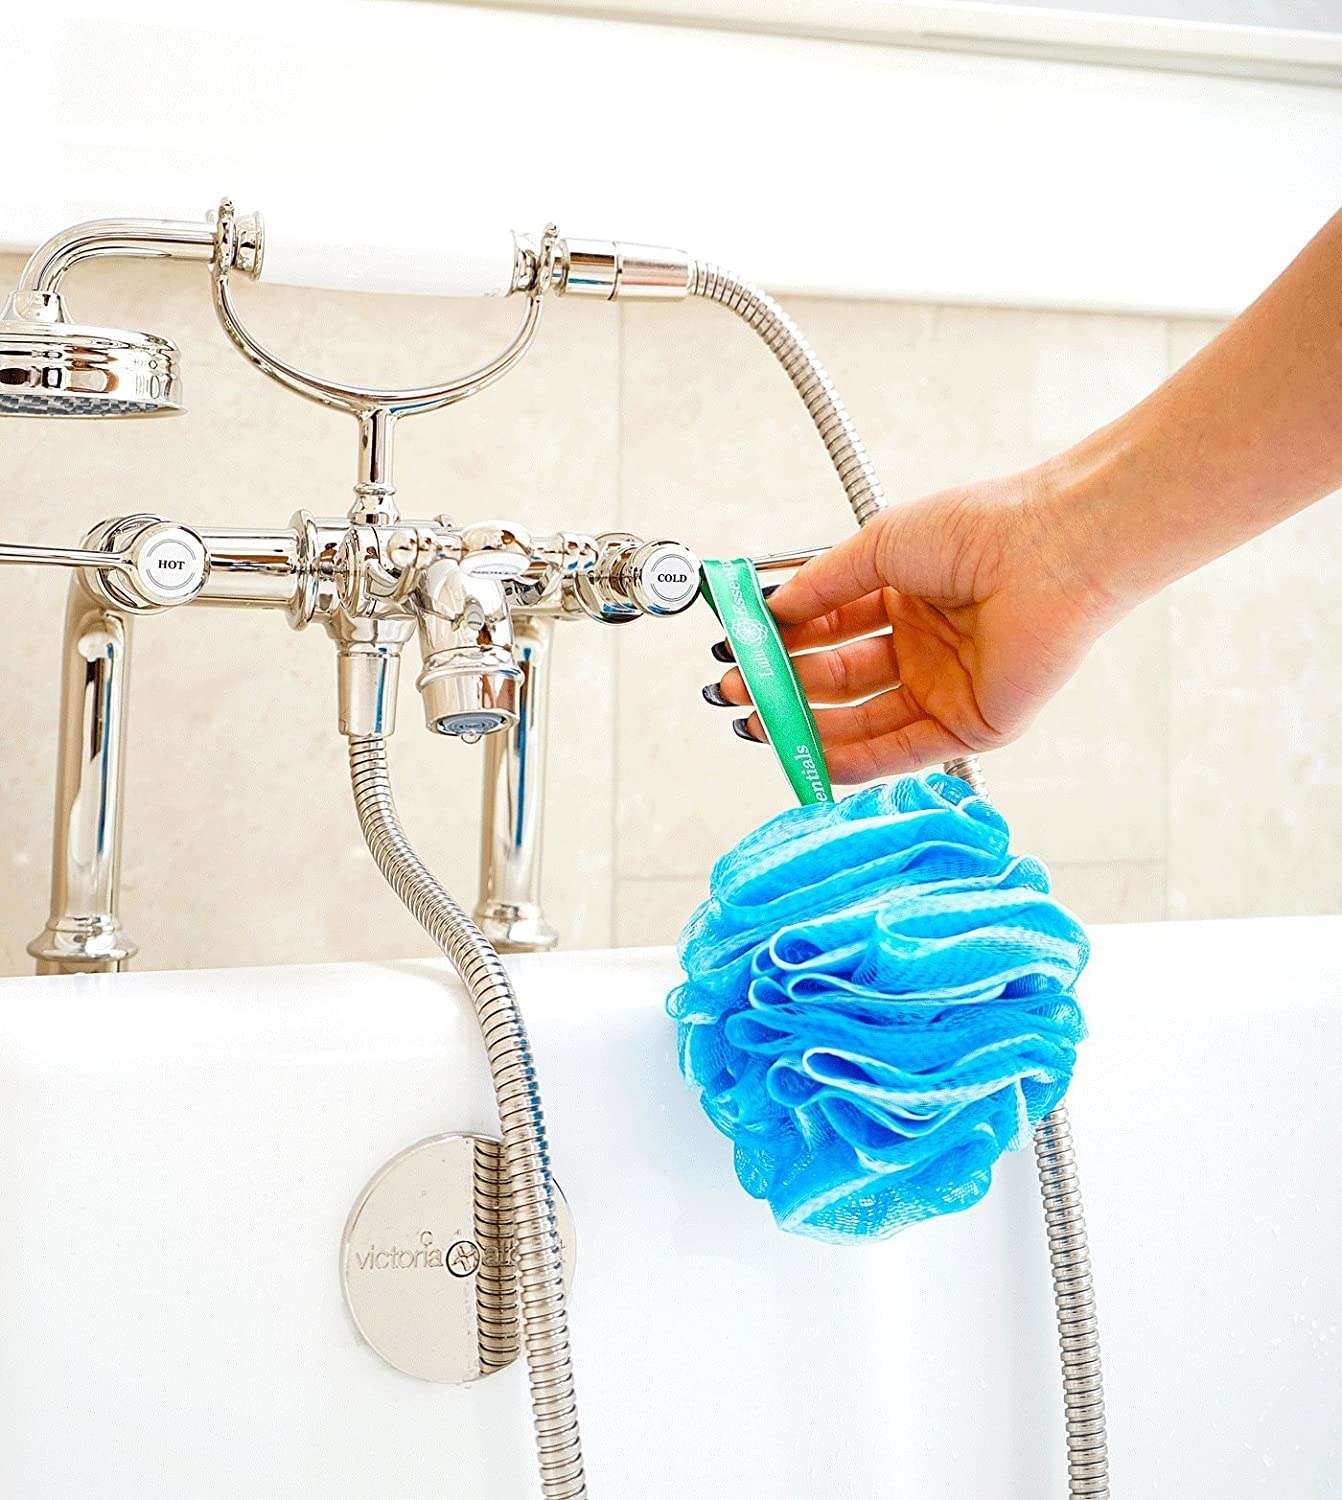 A person hanging a loofah on their faucet